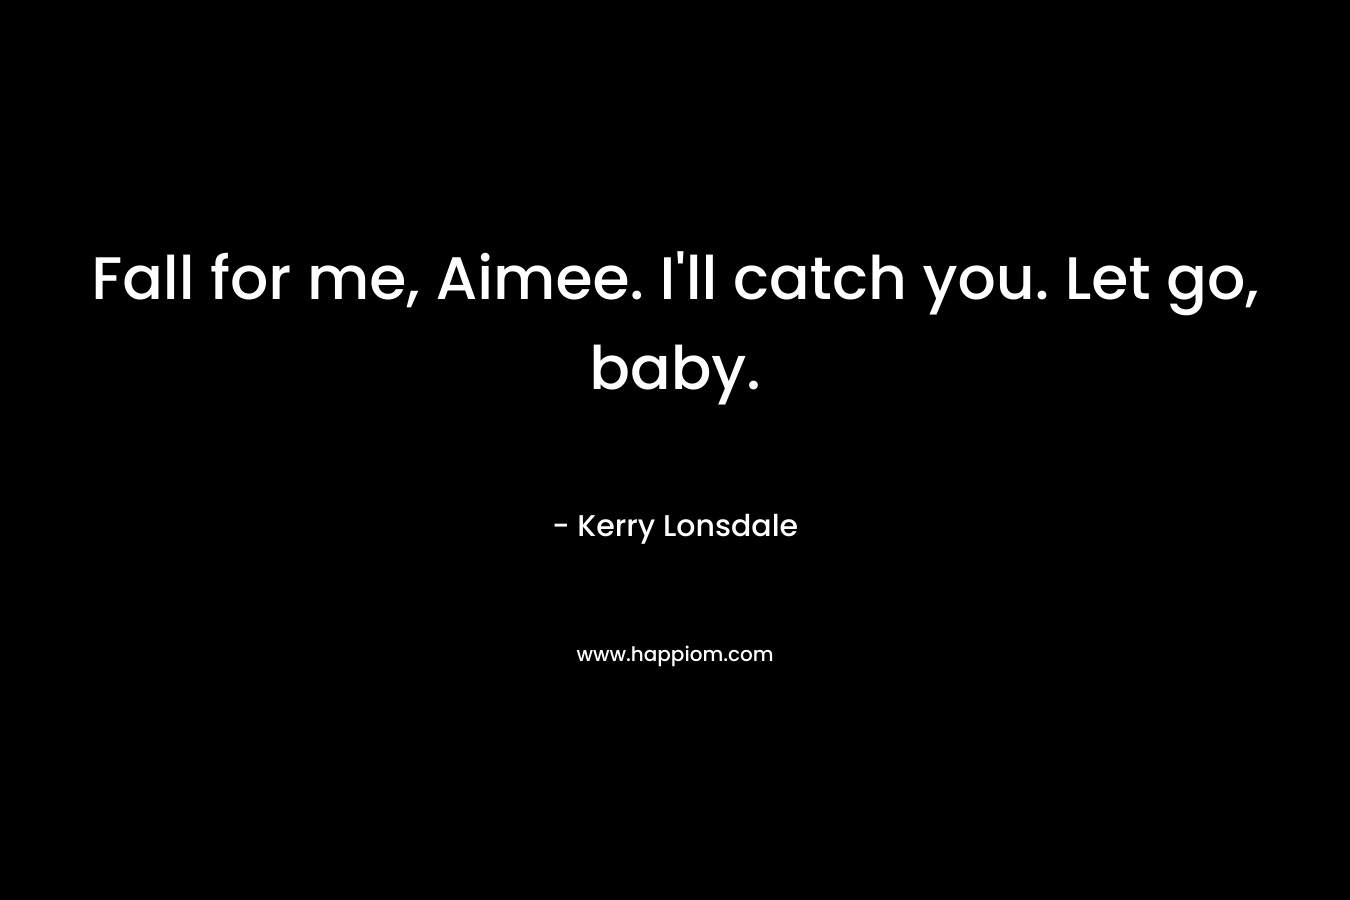 Fall for me, Aimee. I’ll catch you. Let go, baby. – Kerry Lonsdale